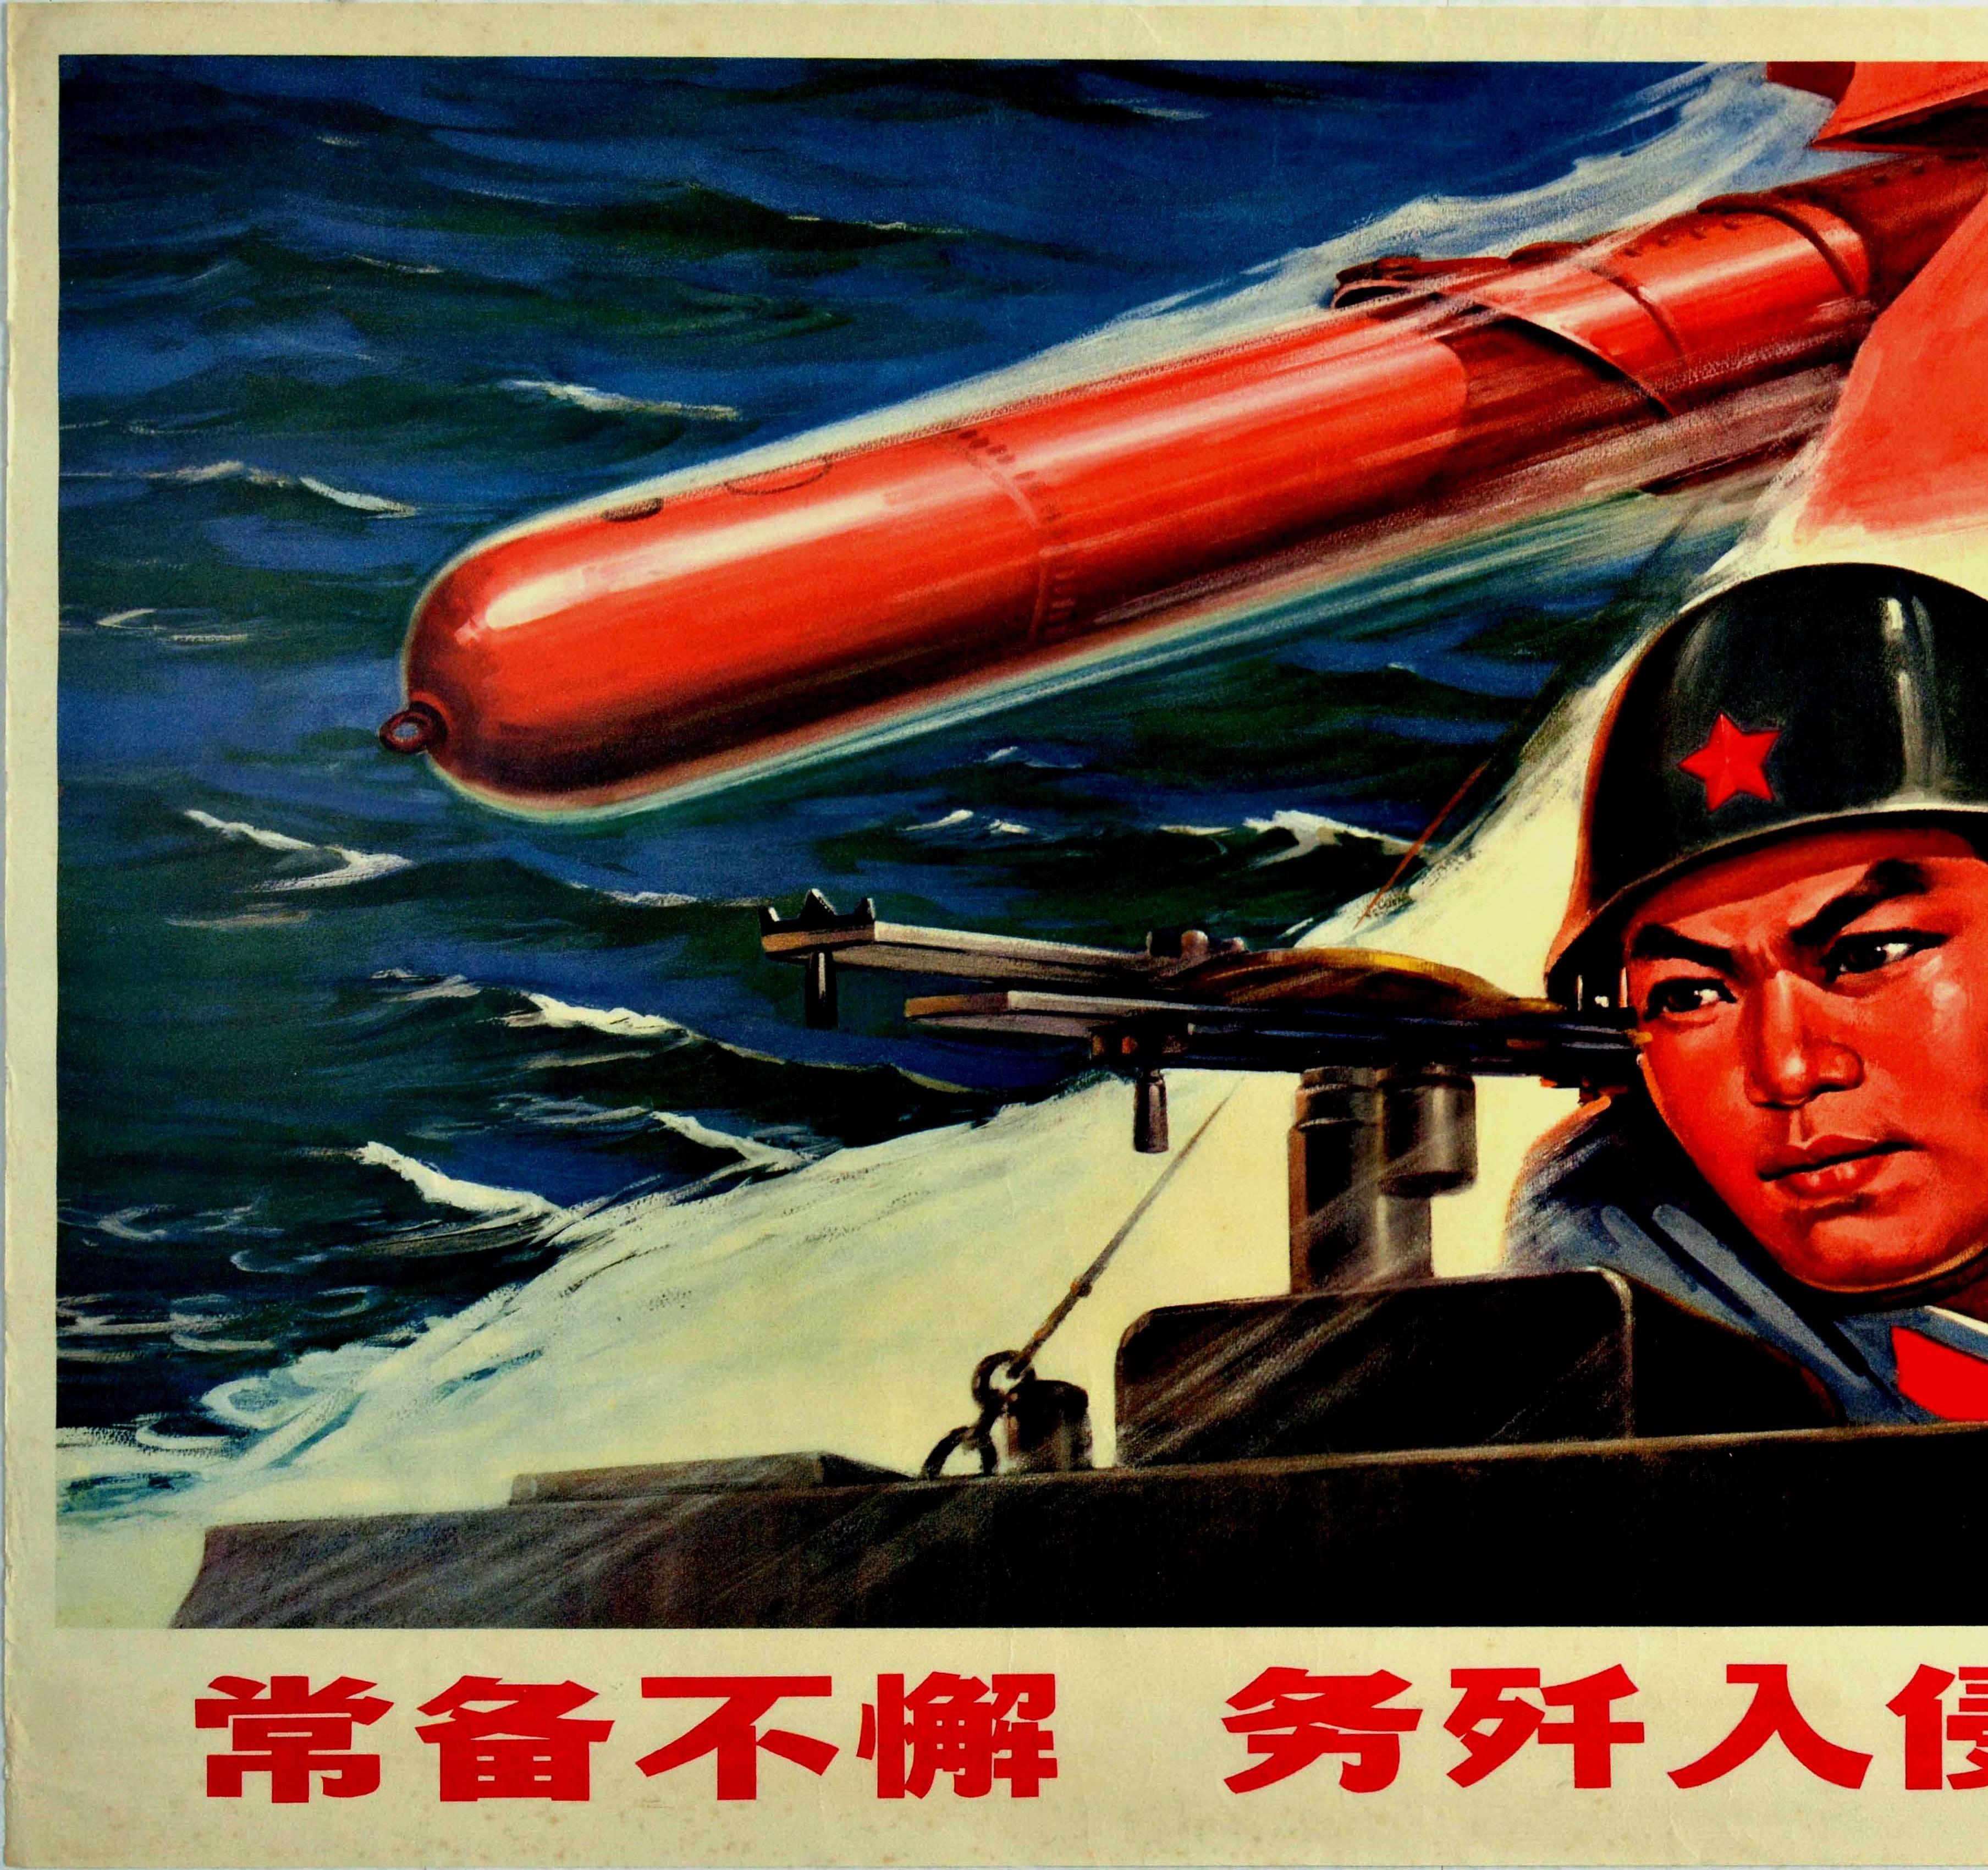 Original vintage Chinese propaganda poster - Stand By To Annihilate Invading Enemies - featuring a dynamic military design depicting a young soldier in uniform and wearing a helmet marked with red star on it holding up a copy of the Little Red Book